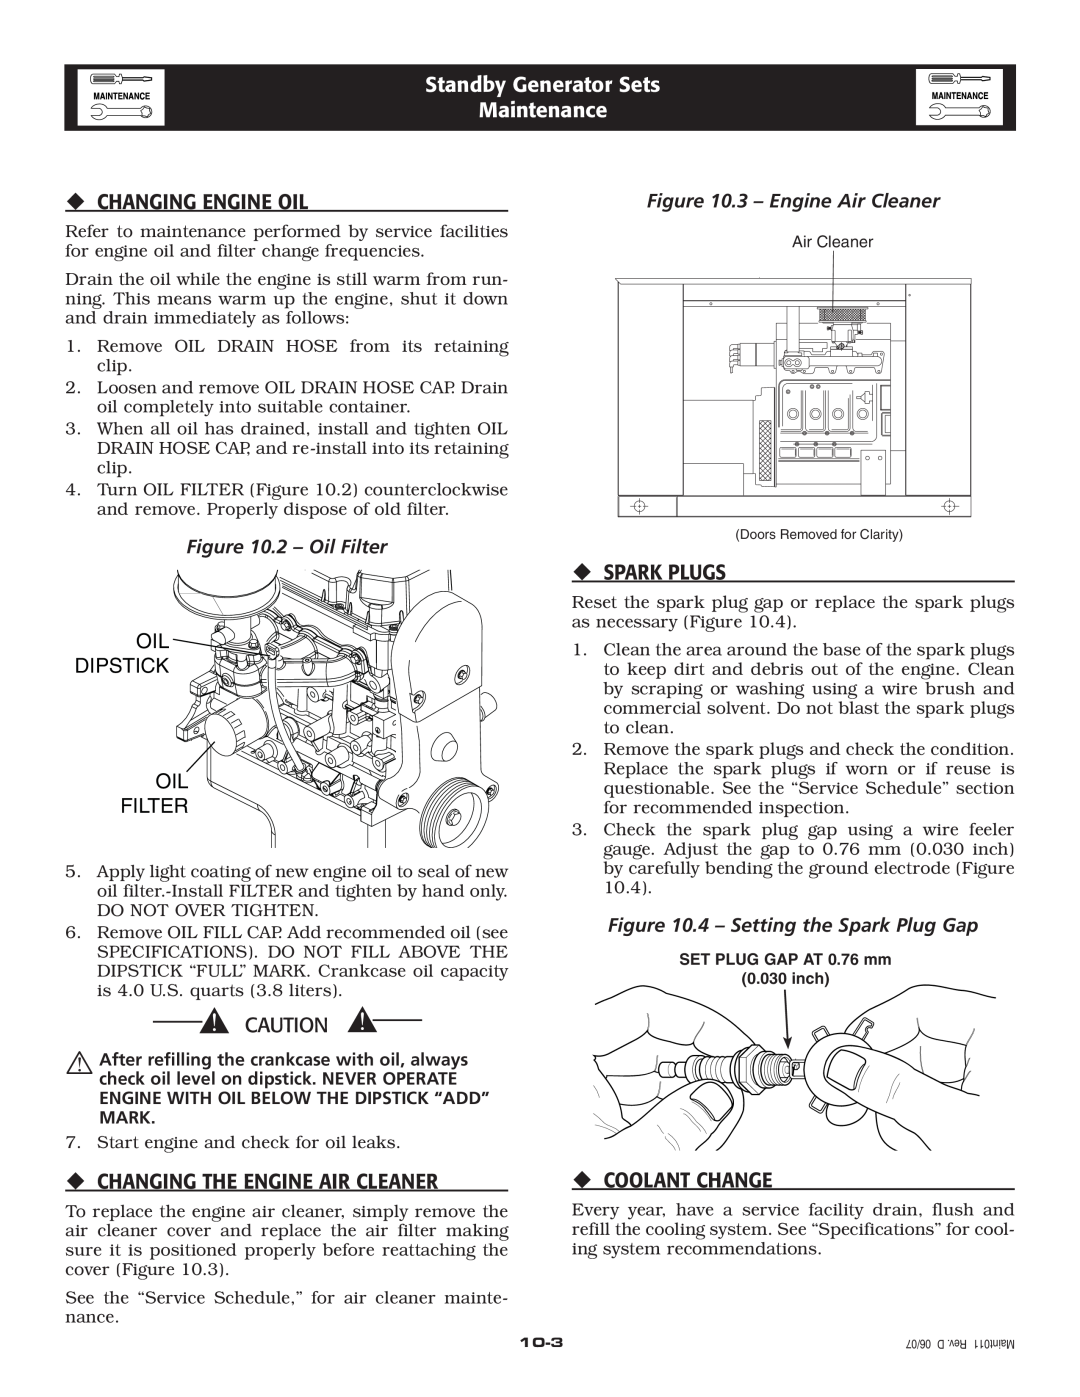 Generac Power Systems 005324-1, 005325-1 owner manual ‹Changing Engine Oil, ‹Spark Plugs, ‹ Changing The Engine Air Cleaner 